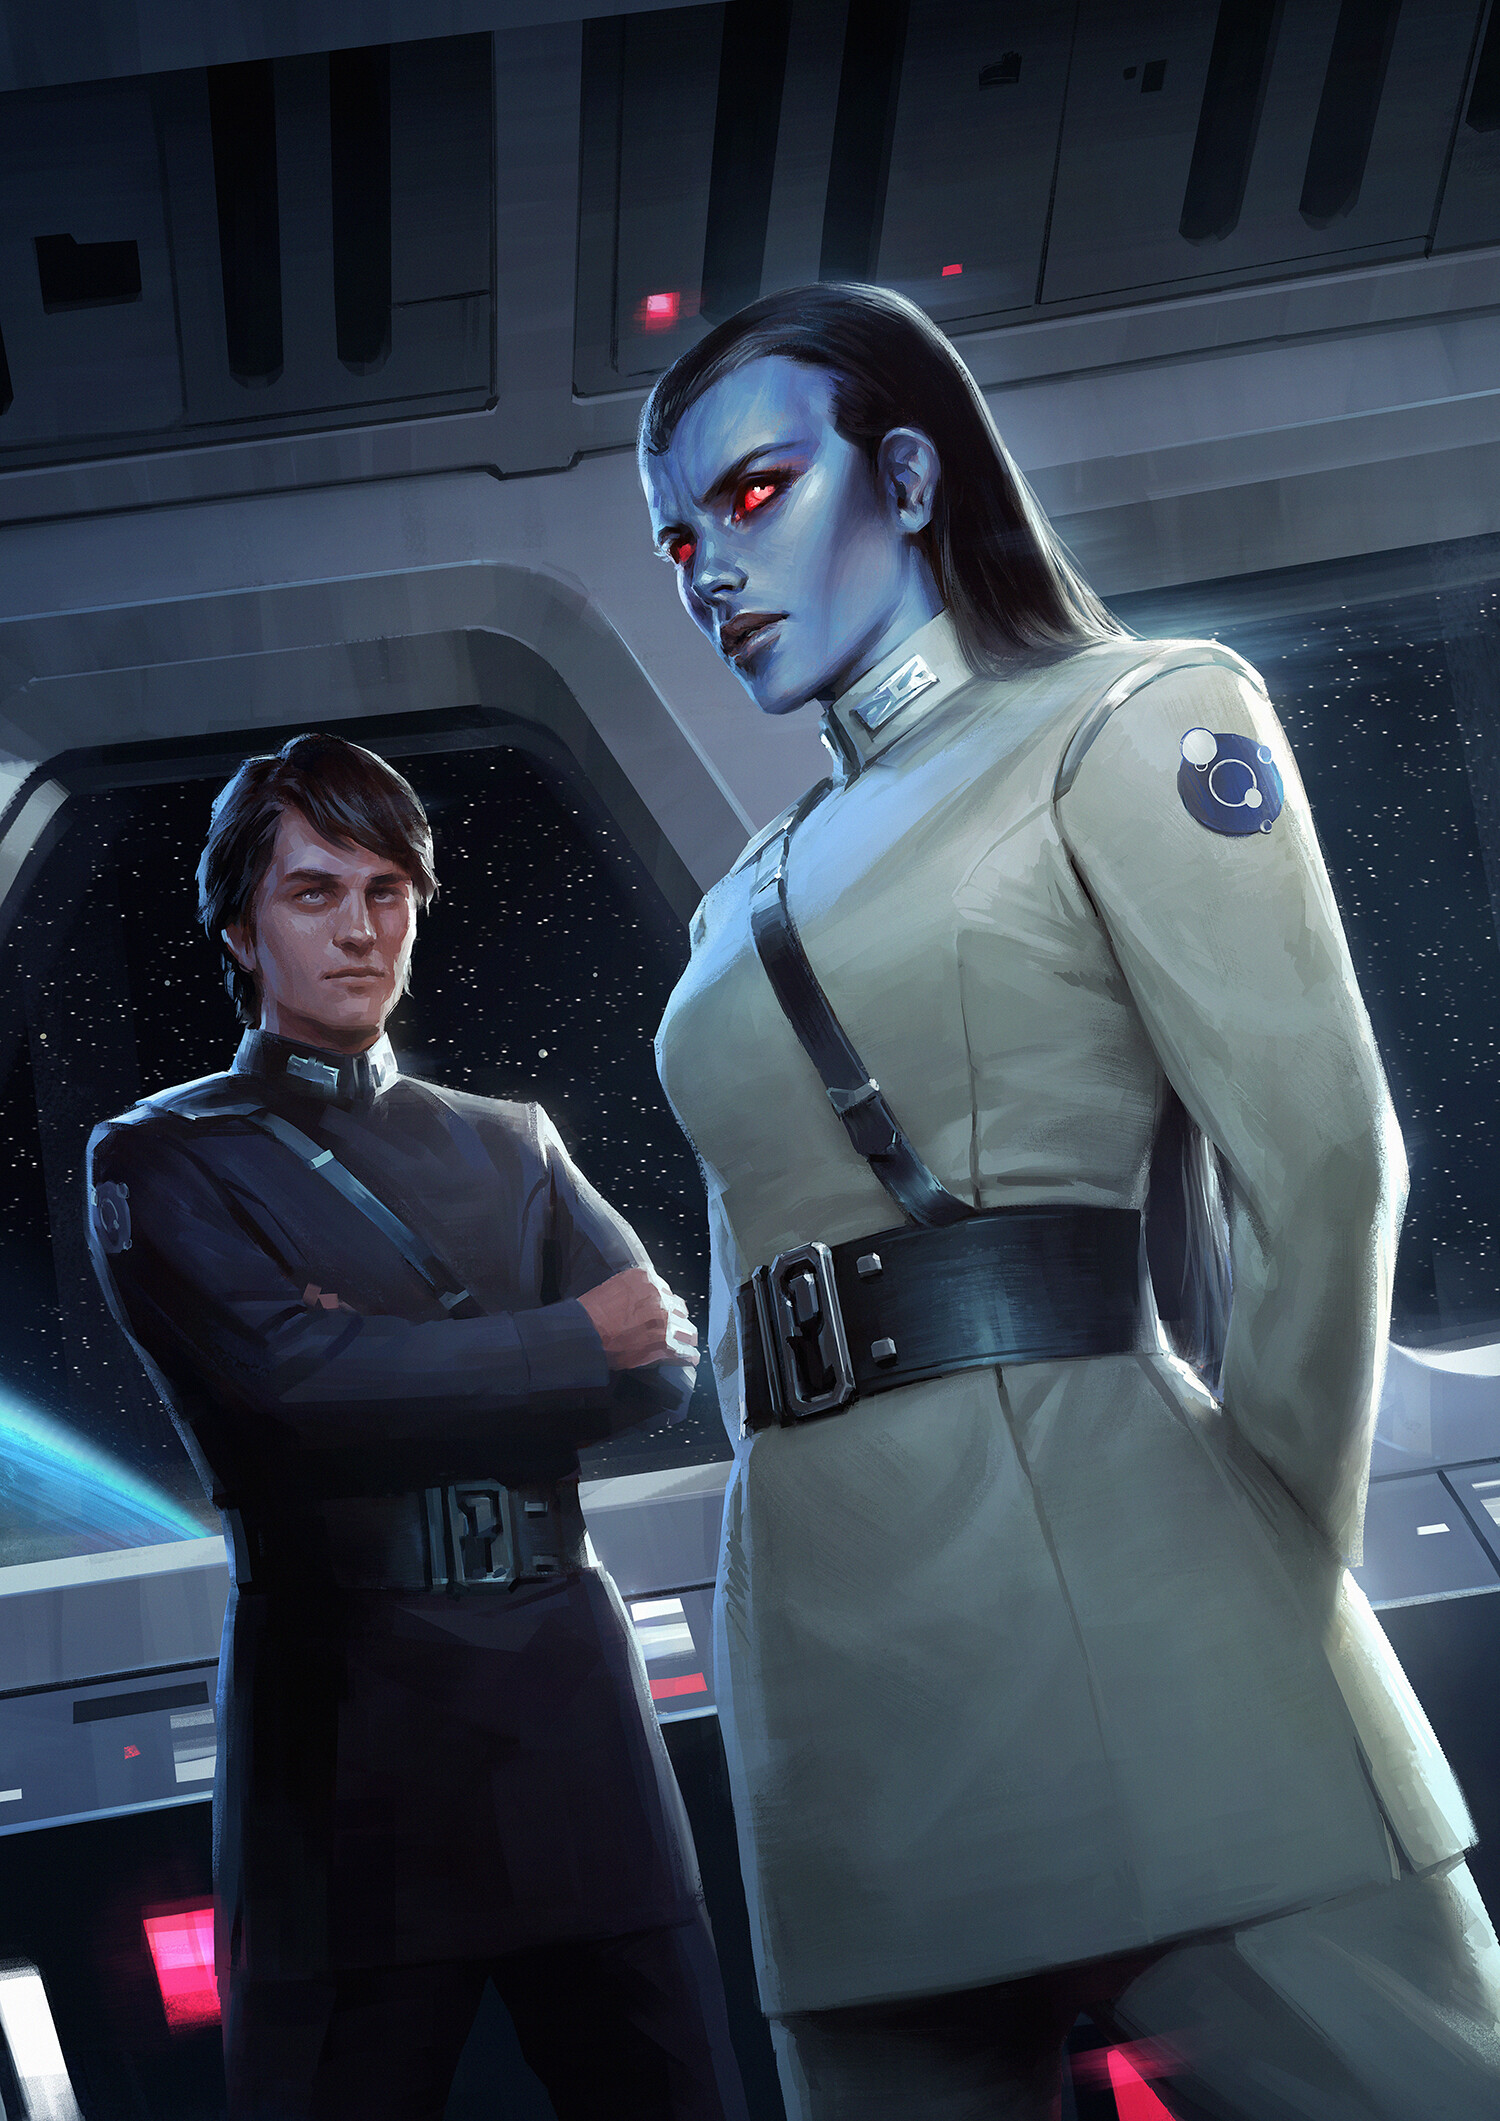 Following up on the Padme art I did for Thrawn: Alliances, Thrawn